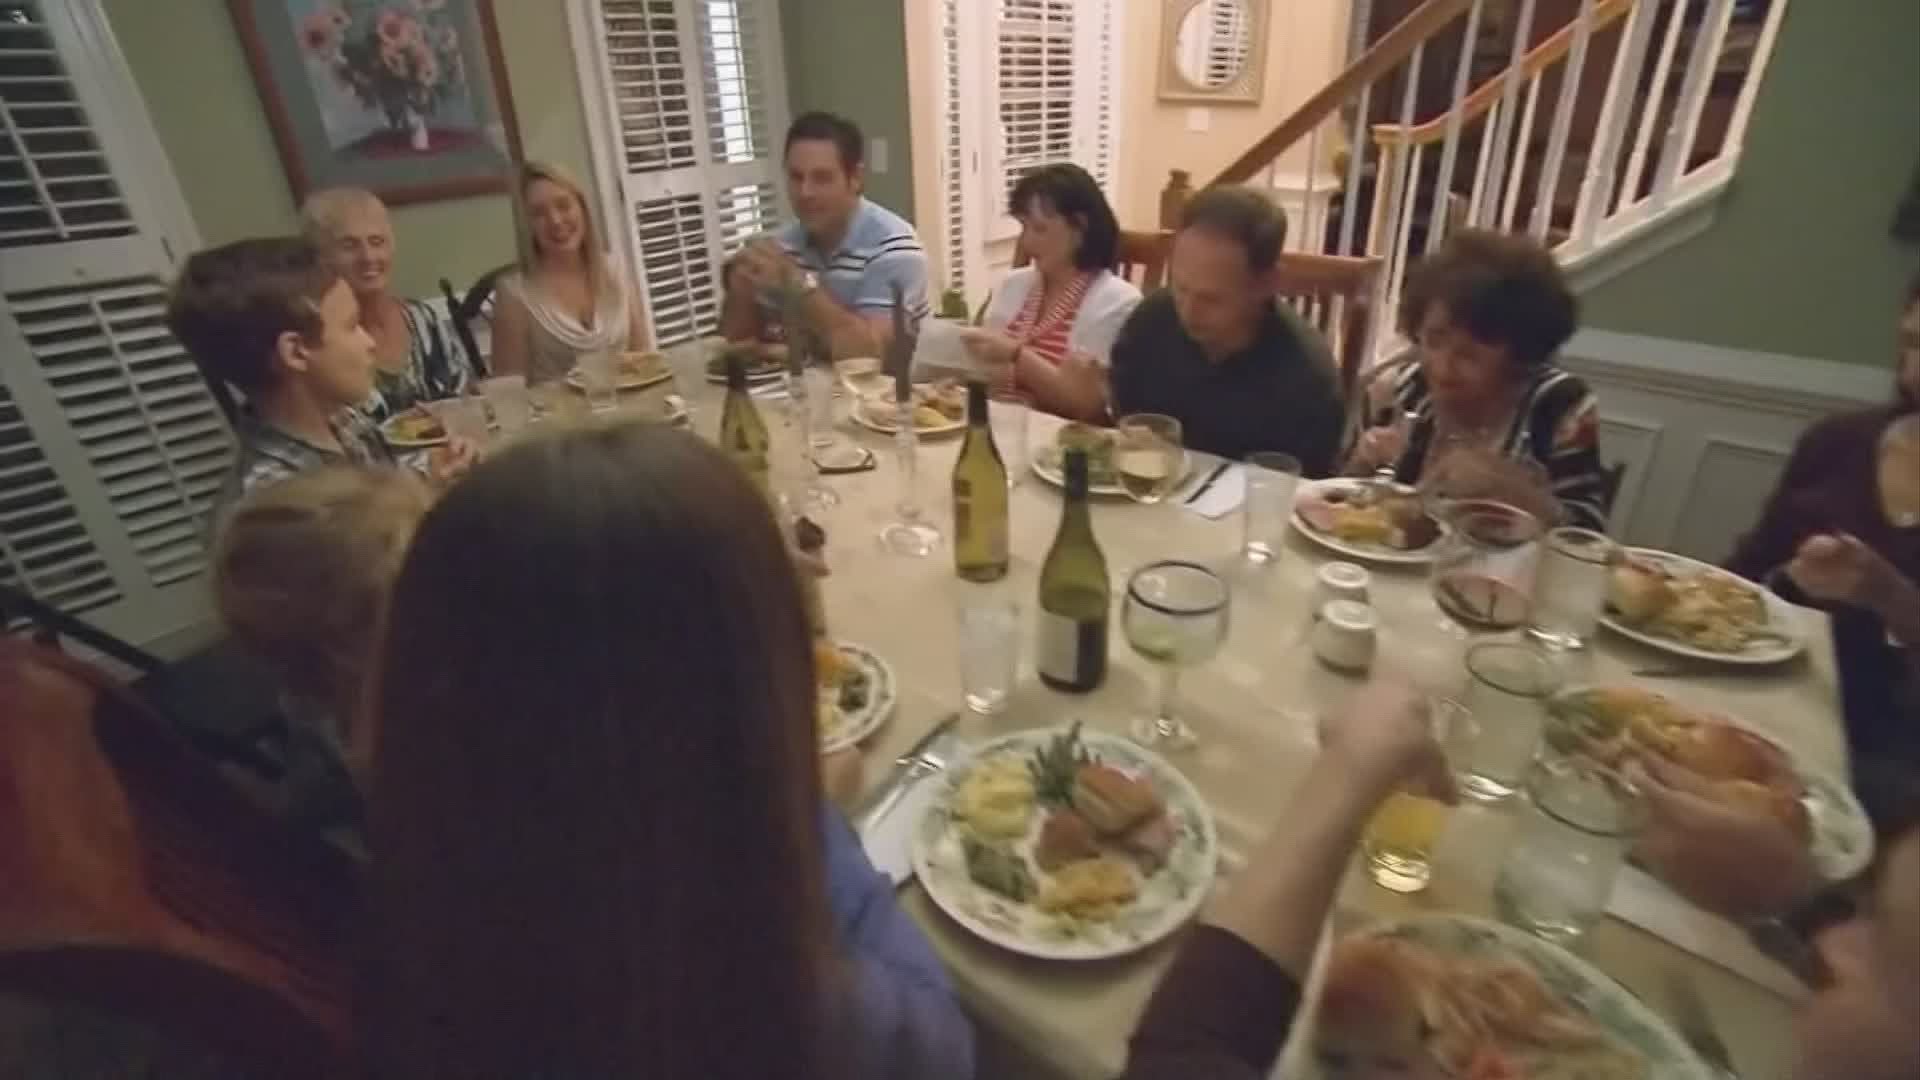 Health experts recommend only celebrating Thanksgiving with your household.